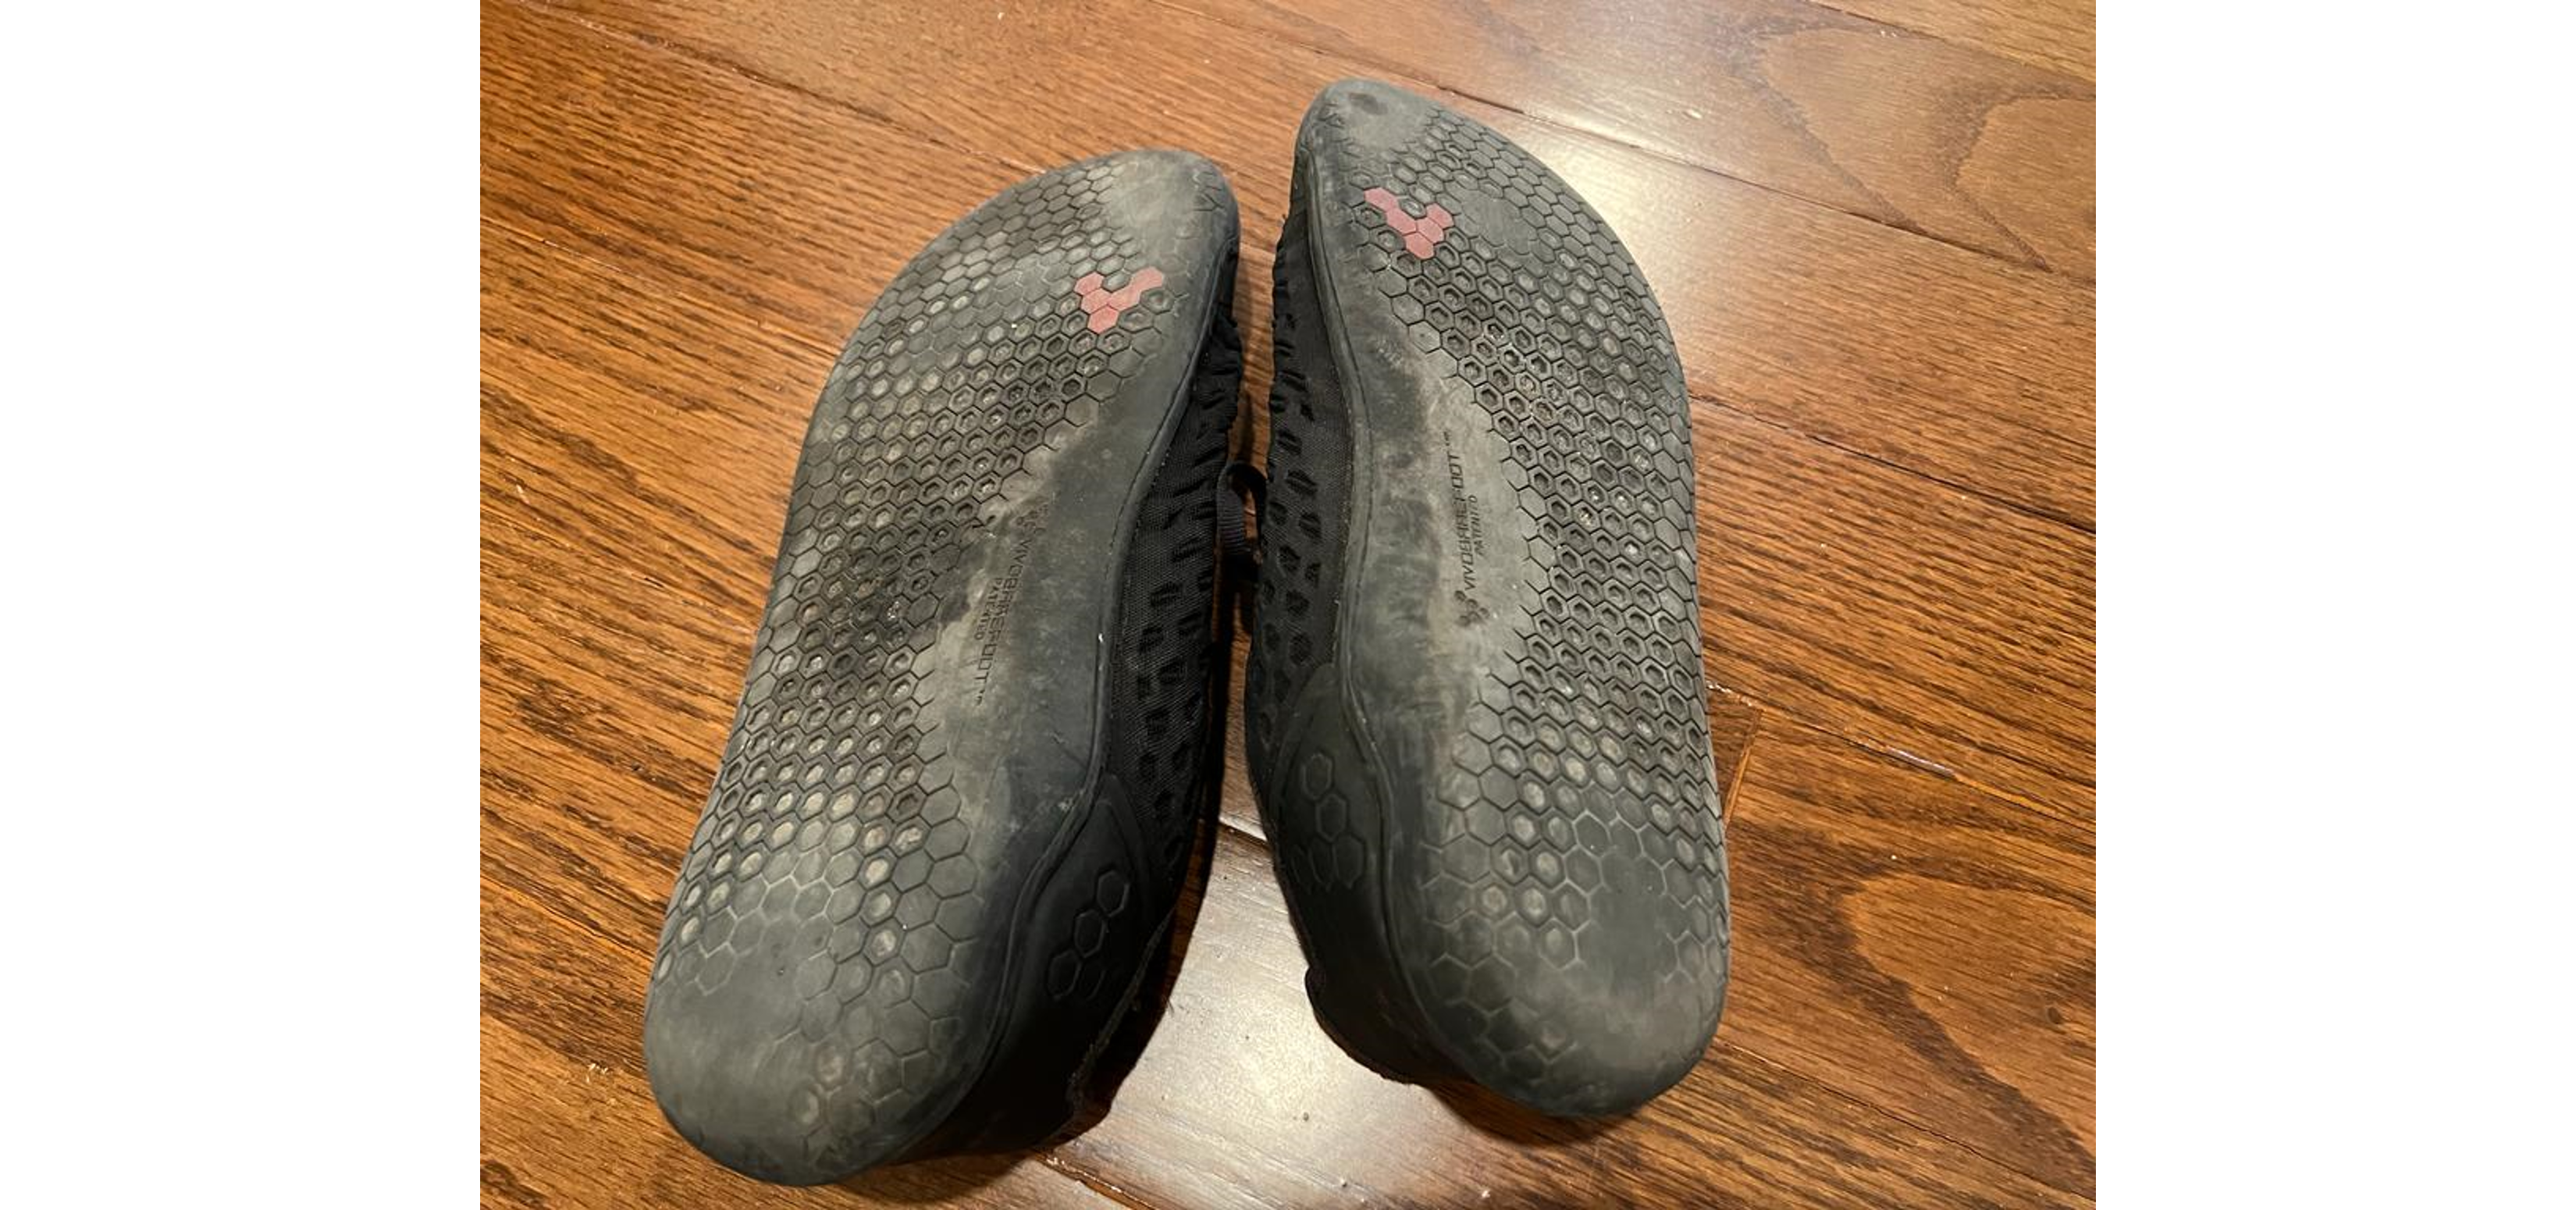 Stealth 3 soles after 3 years of cross training